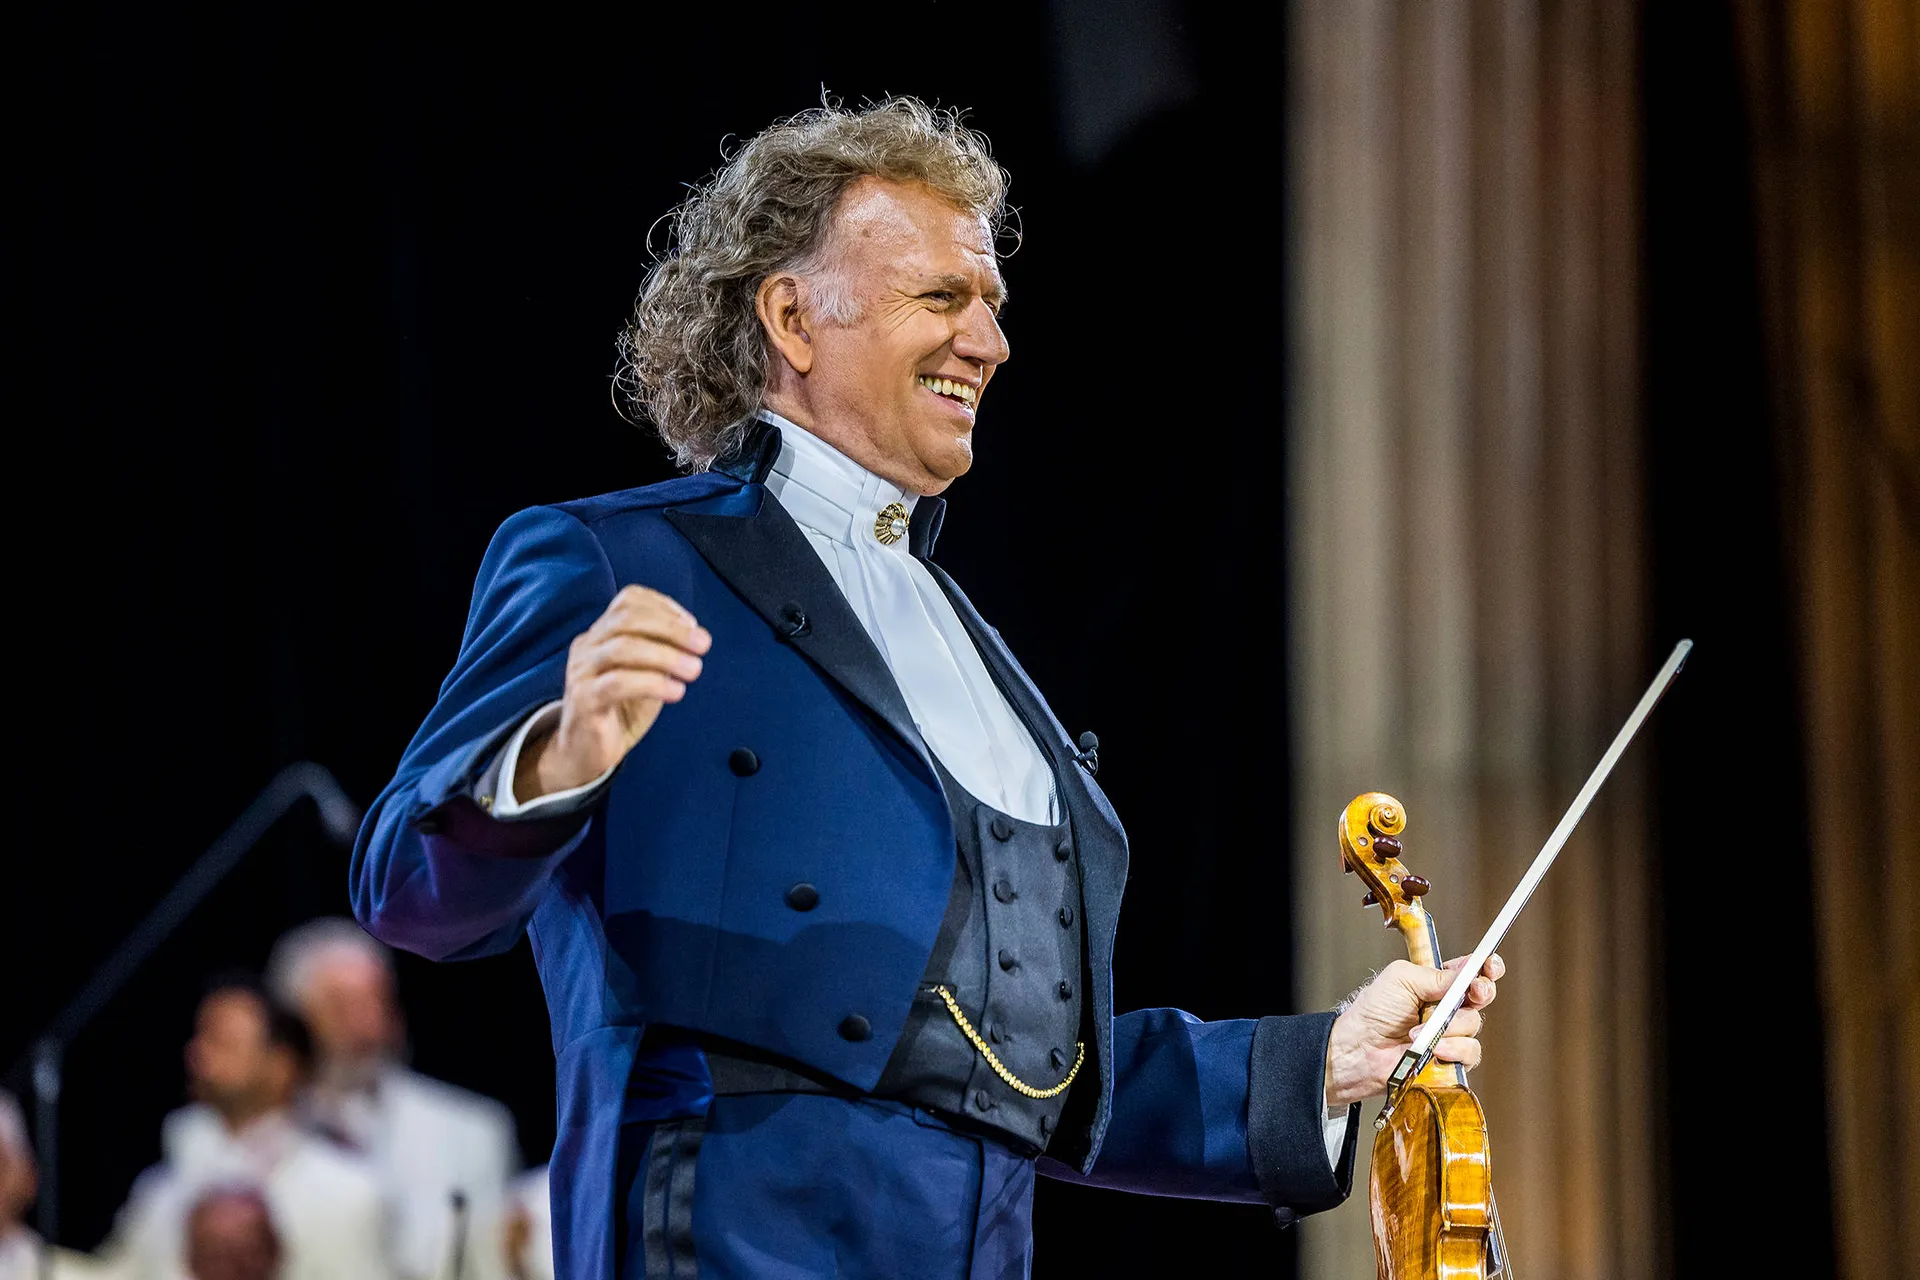 André Rieu in Maastricht